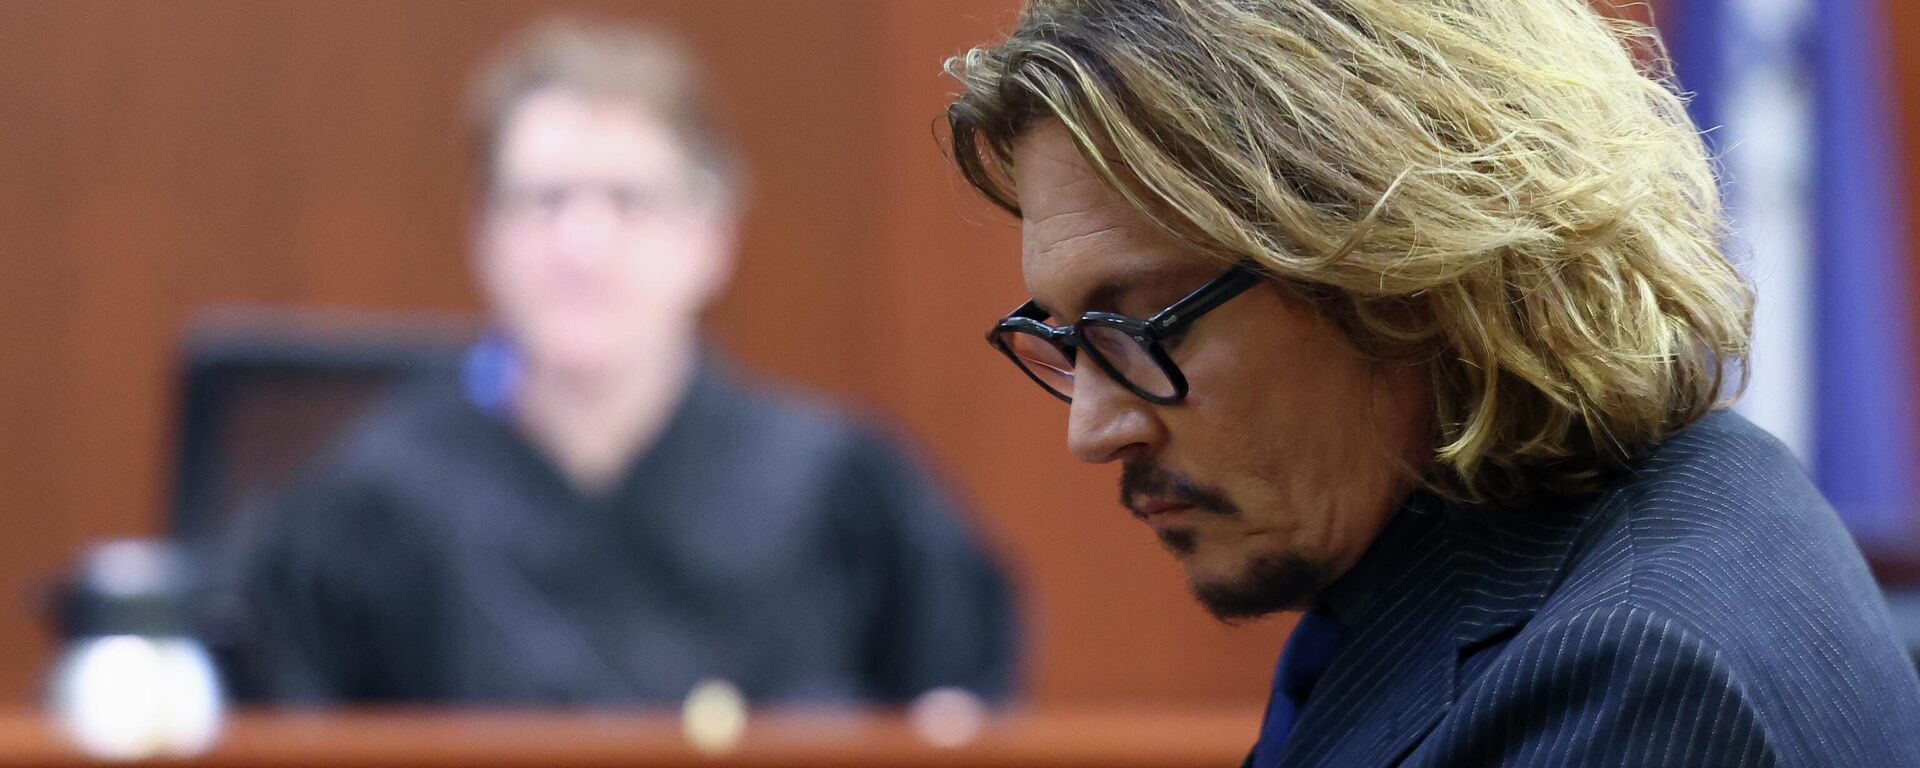 Actor Johnny Depp attends his defamation trial against his ex-wife Amber Heard at the Fairfax County Circuit Courthouse in Fairfax, Virginia, on April 13, 2022 - Sputnik International, 1920, 14.04.2022